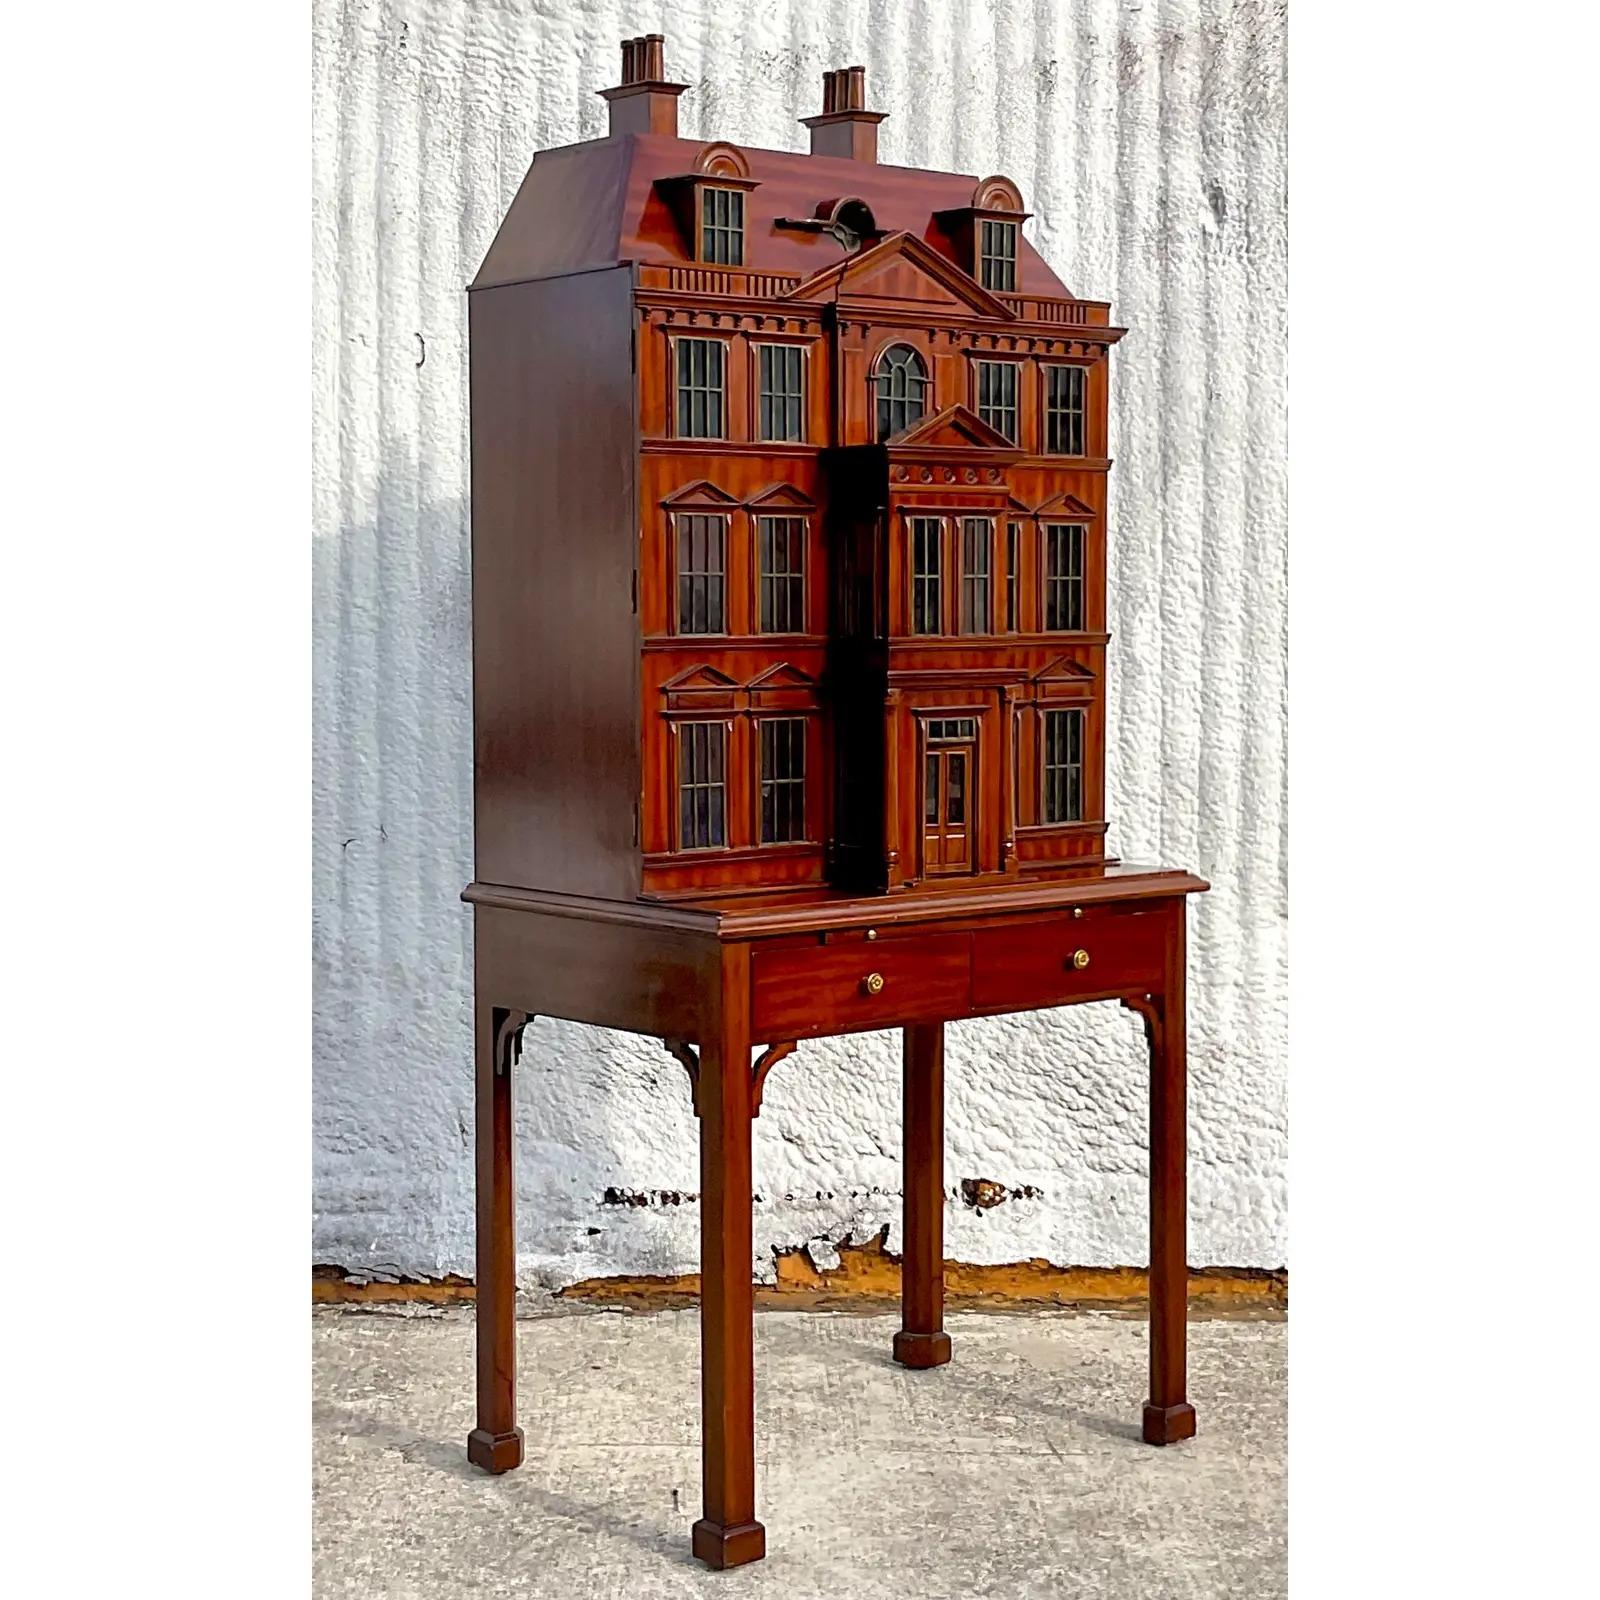 An exceptional vintage Maitland Smith dry bar. Part of their highly coveted Dollhouse collection. Brass mullion windows and peaked windows make this a super special collectors pieces. Two interior shelves. (Not pictured). Acquired from a Palm Beach